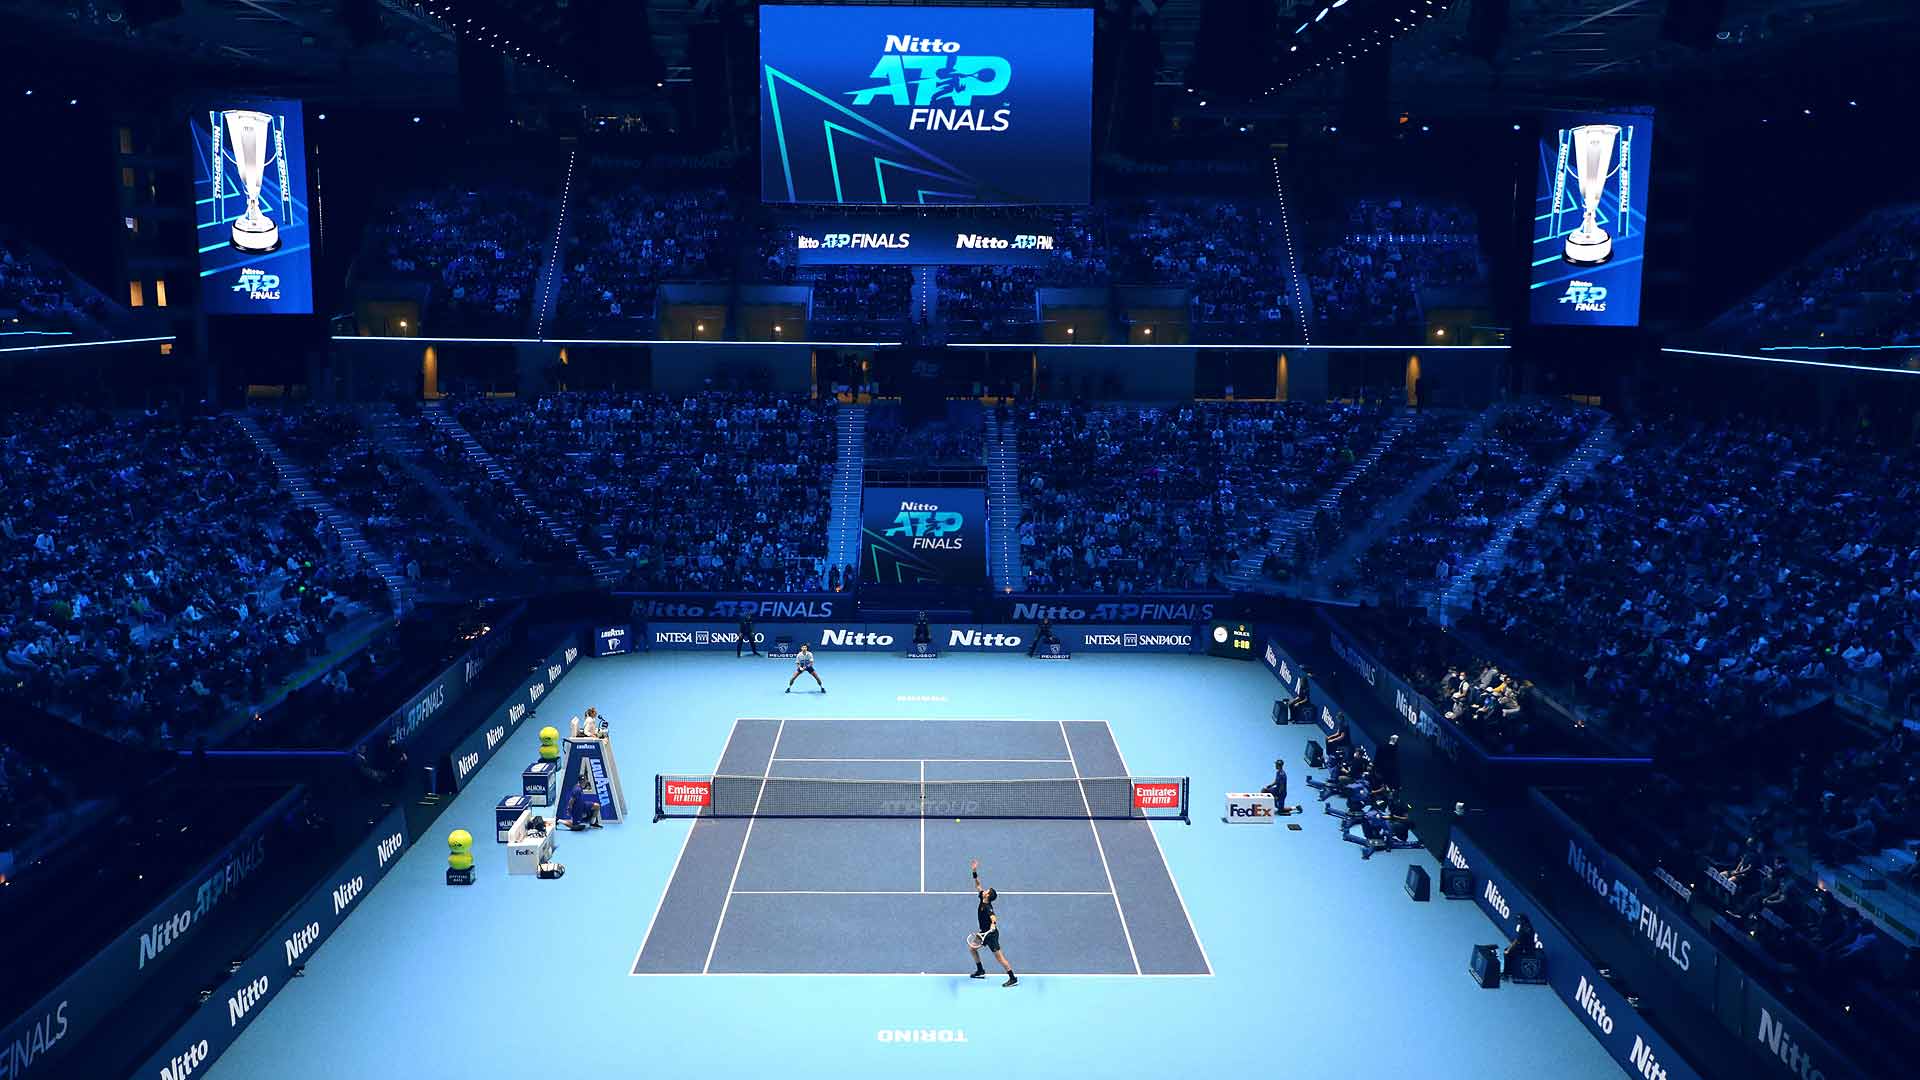 The prize money for the 2022 Nitto ATP Finals is $14.75 million.